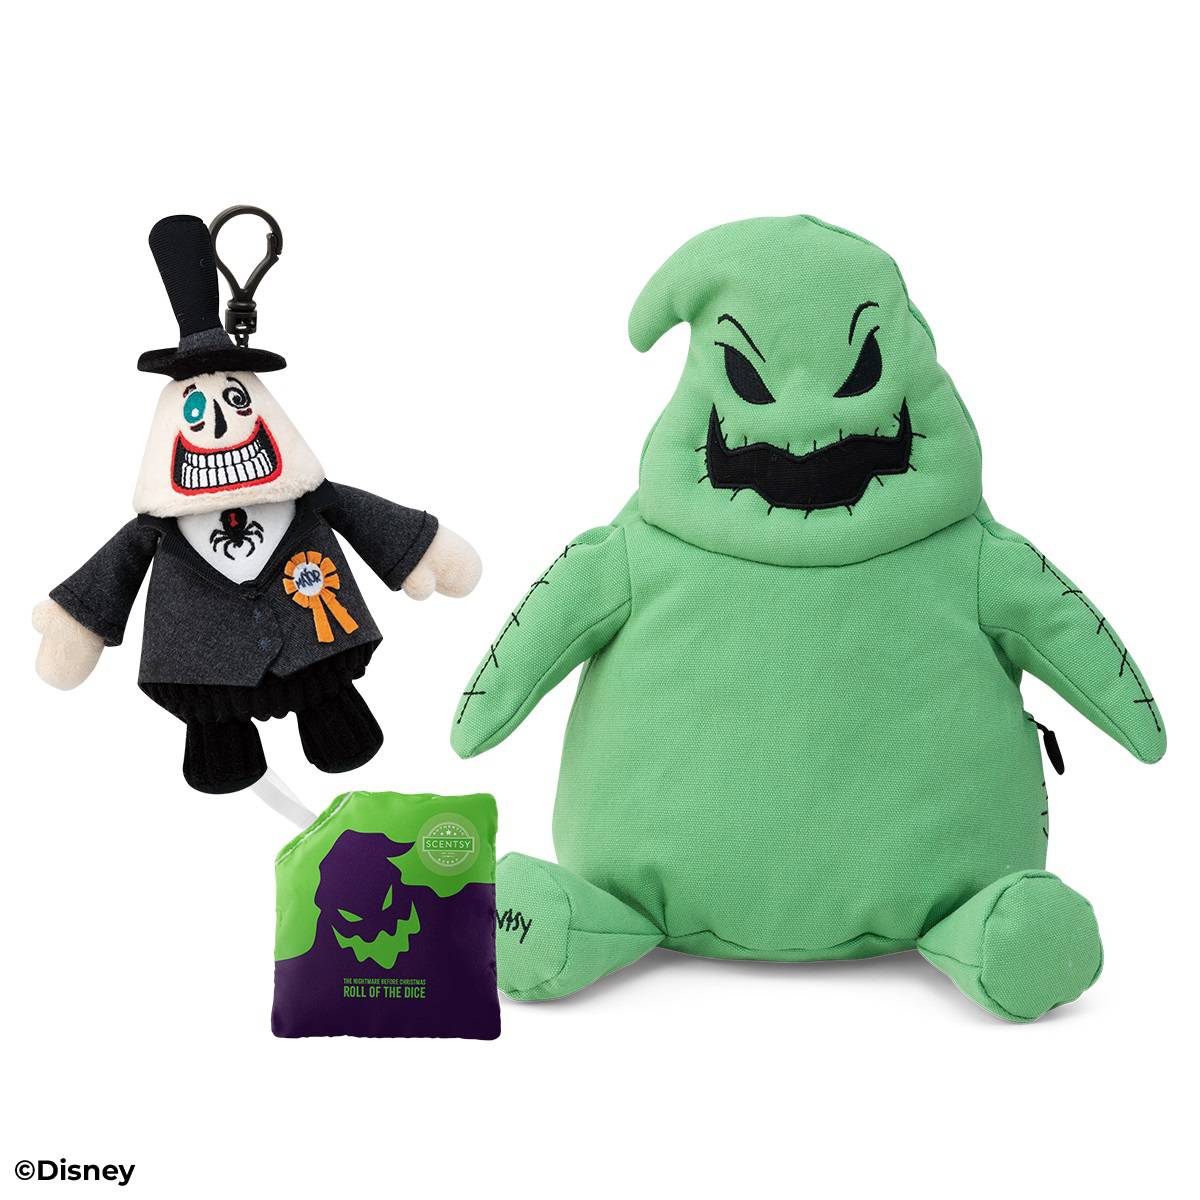 Oogie Boogie Scentsy Buddy and the Mayor